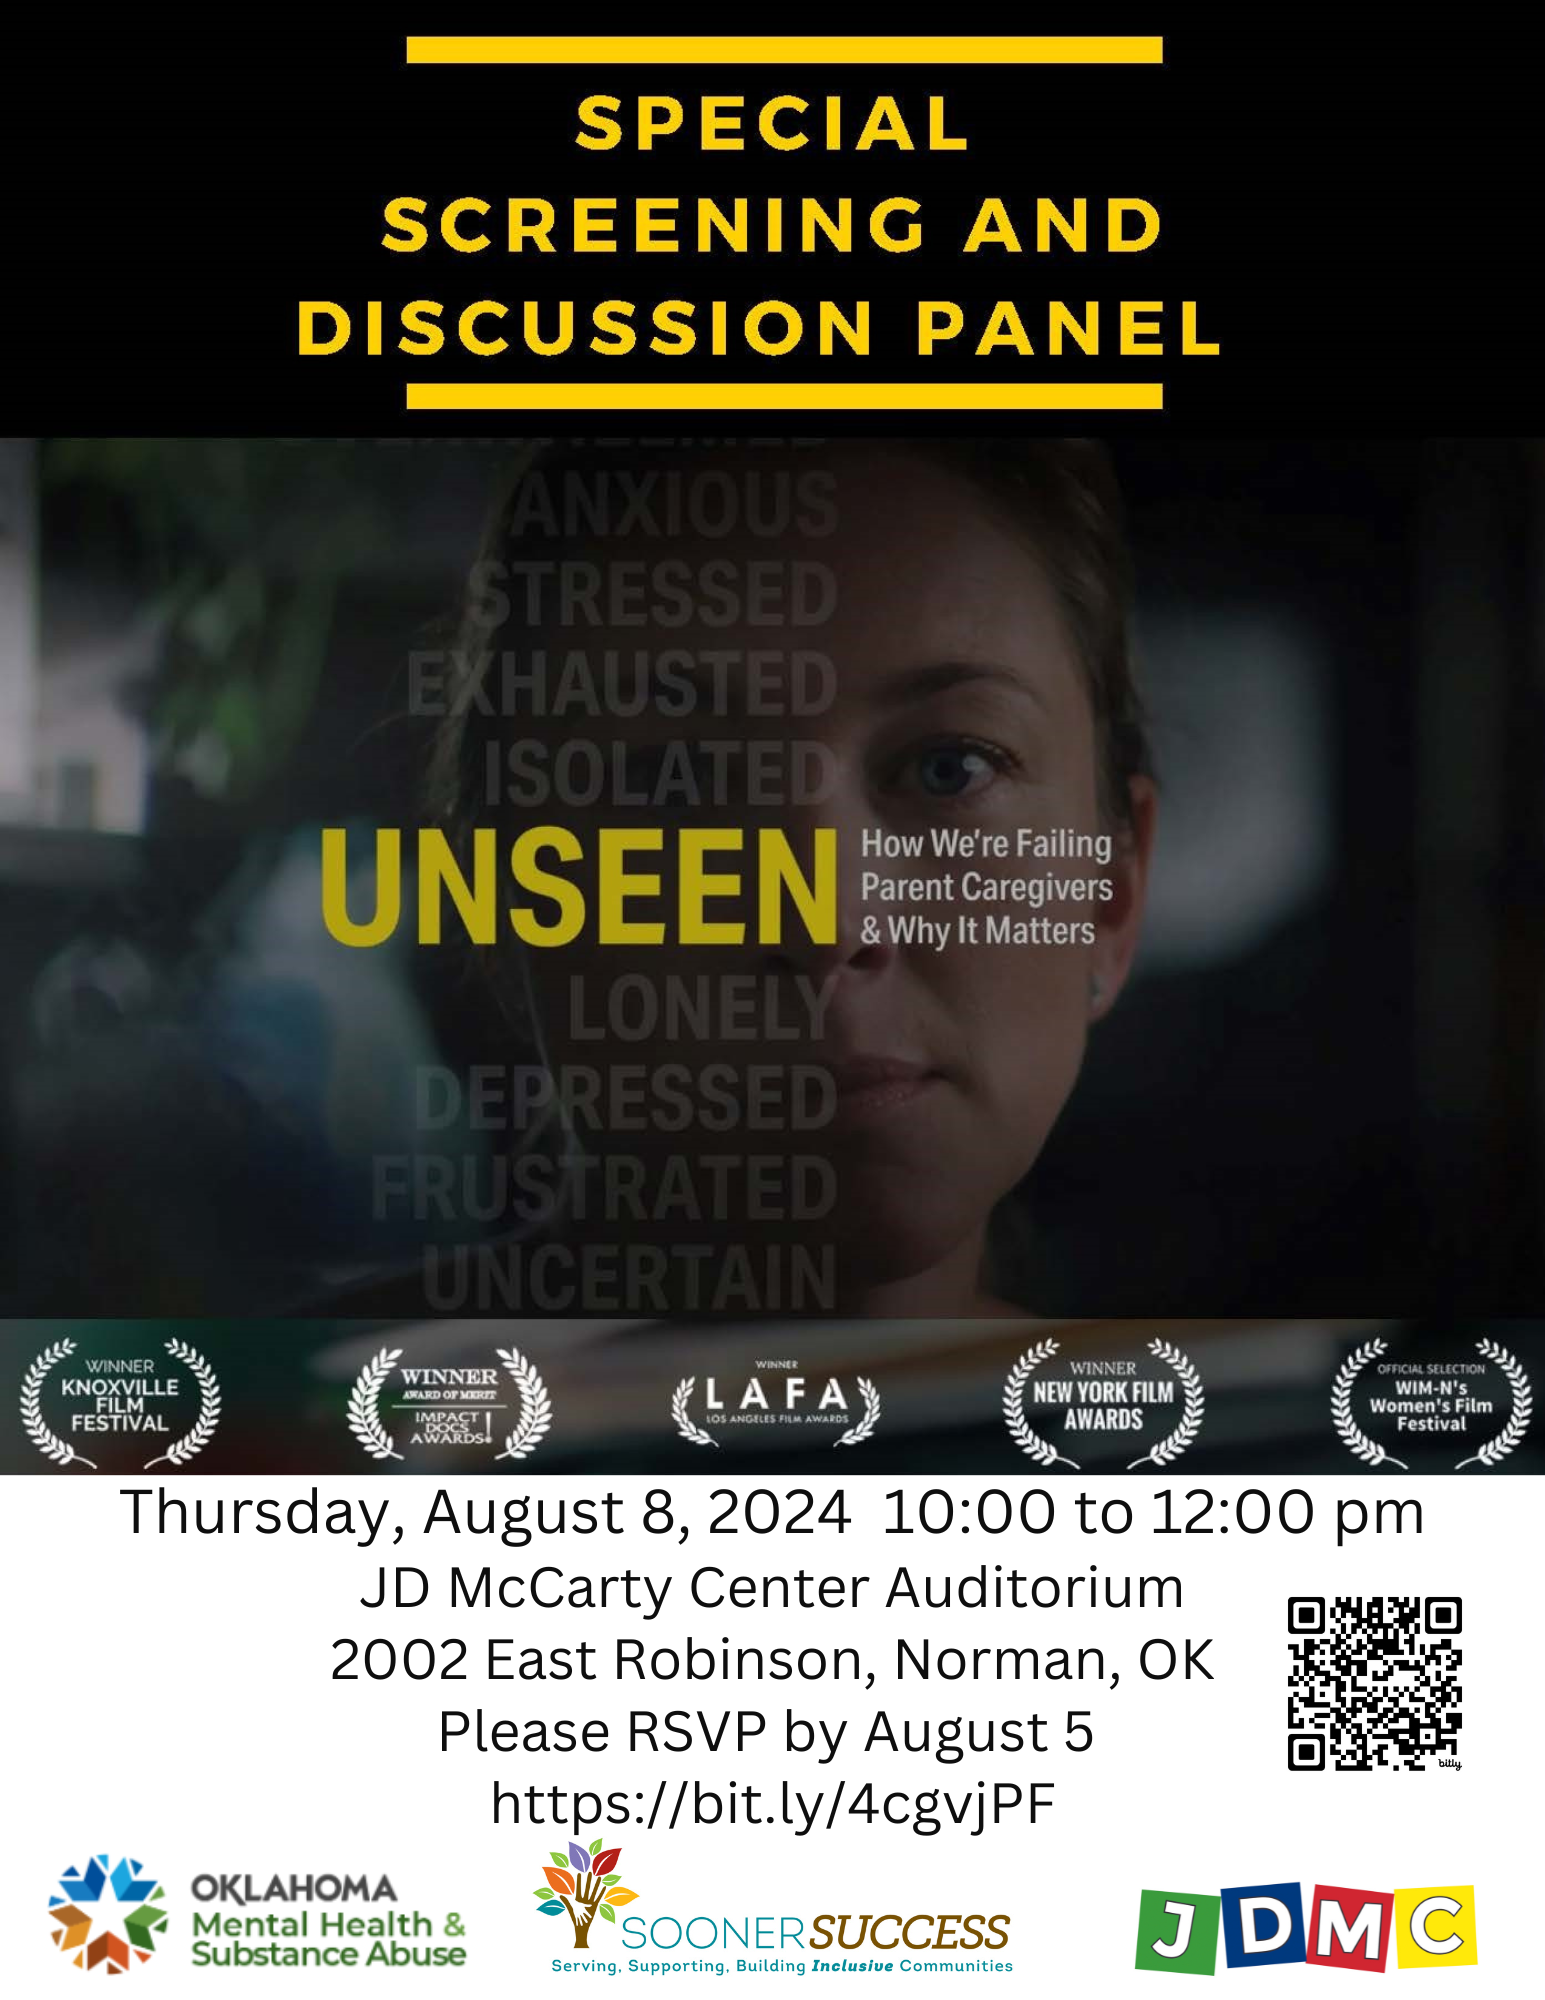 Free community showing of the award winning documentary, Unseen on Thursday, August 8 from 10-12pm. Please join us and register!